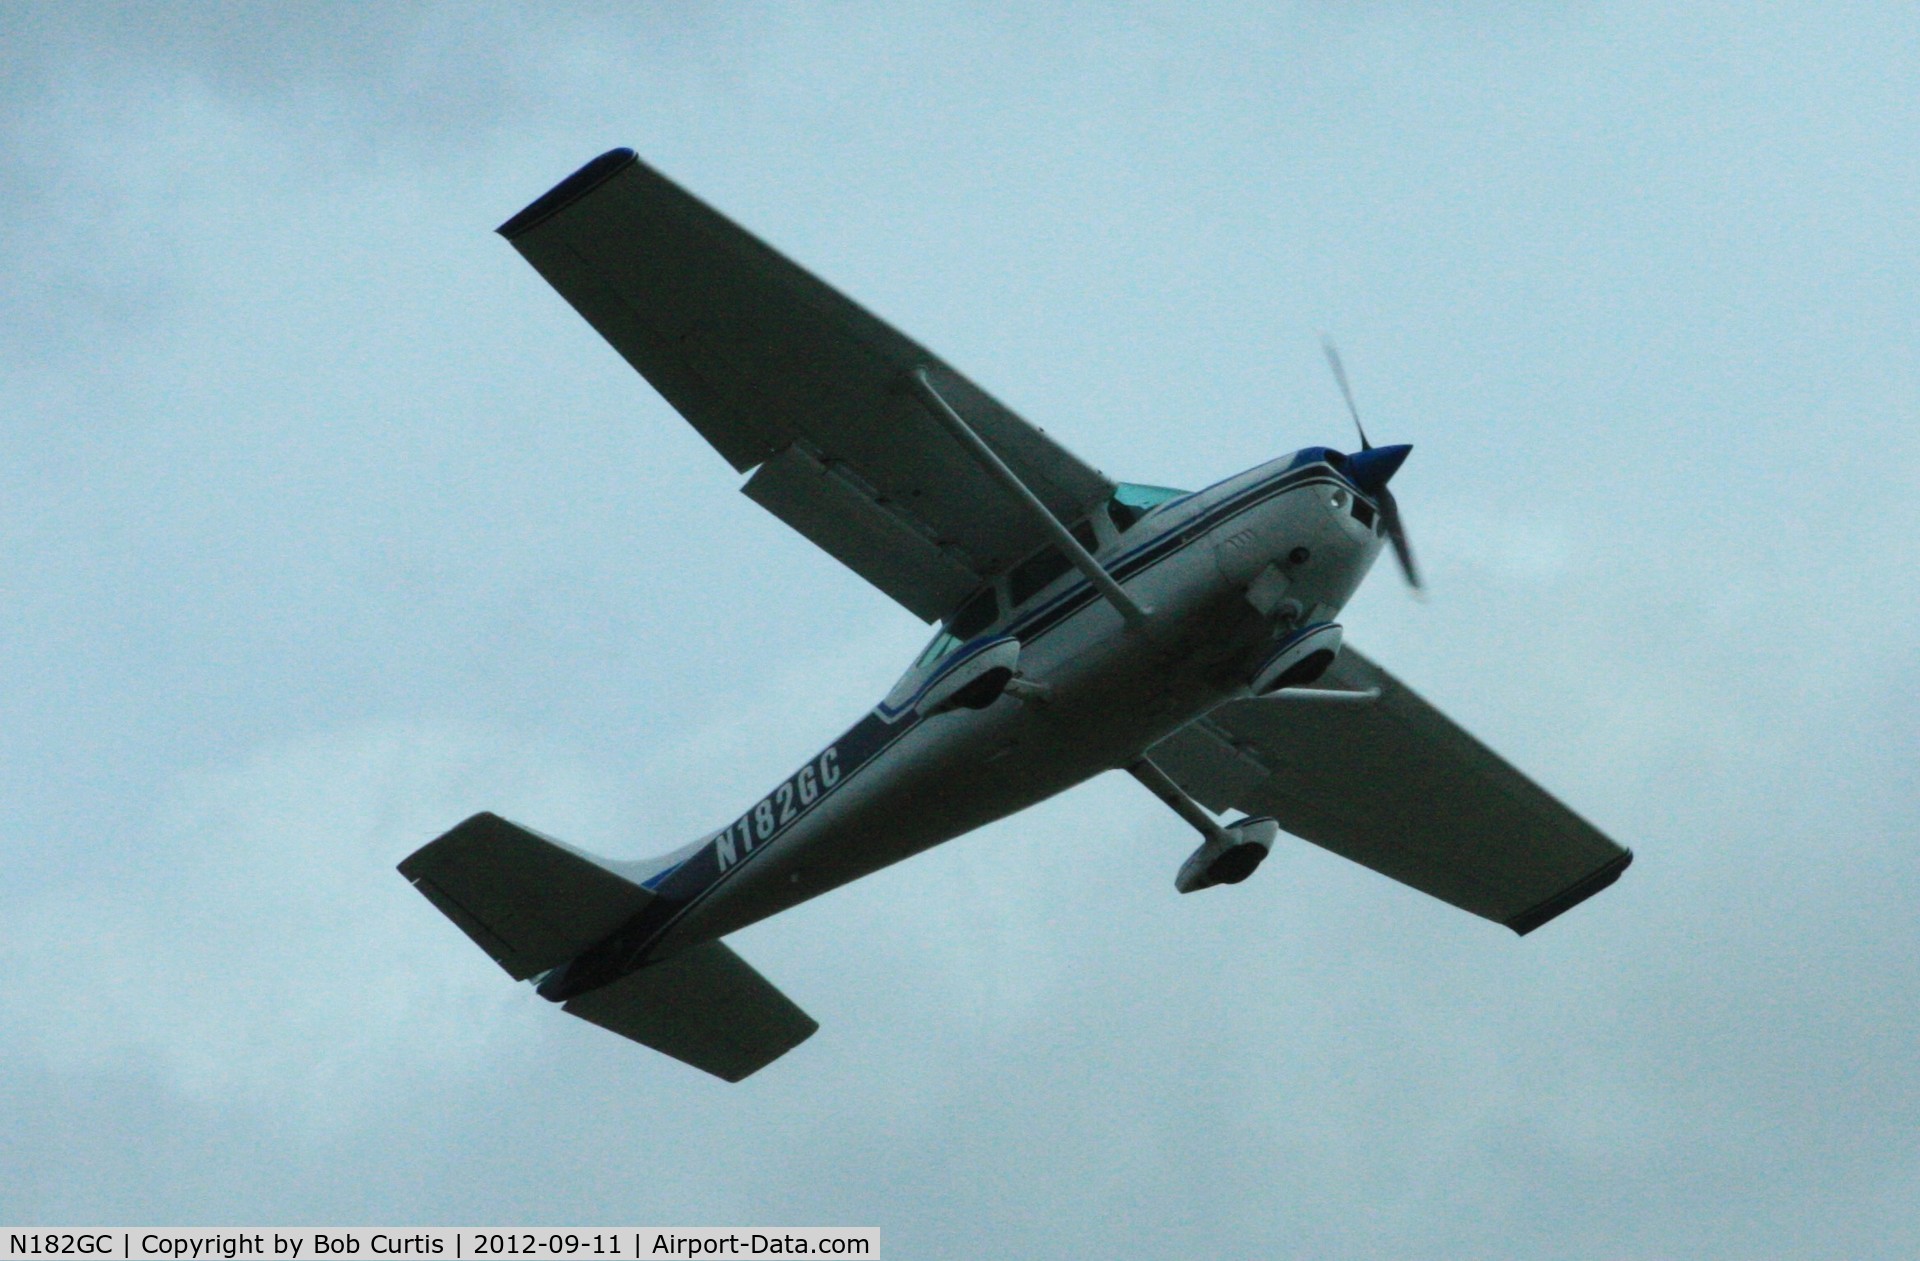 N182GC, 1976 Cessna 182P Skylane C/N 18264982, Taking off from Lee on the Solent at about 14.30